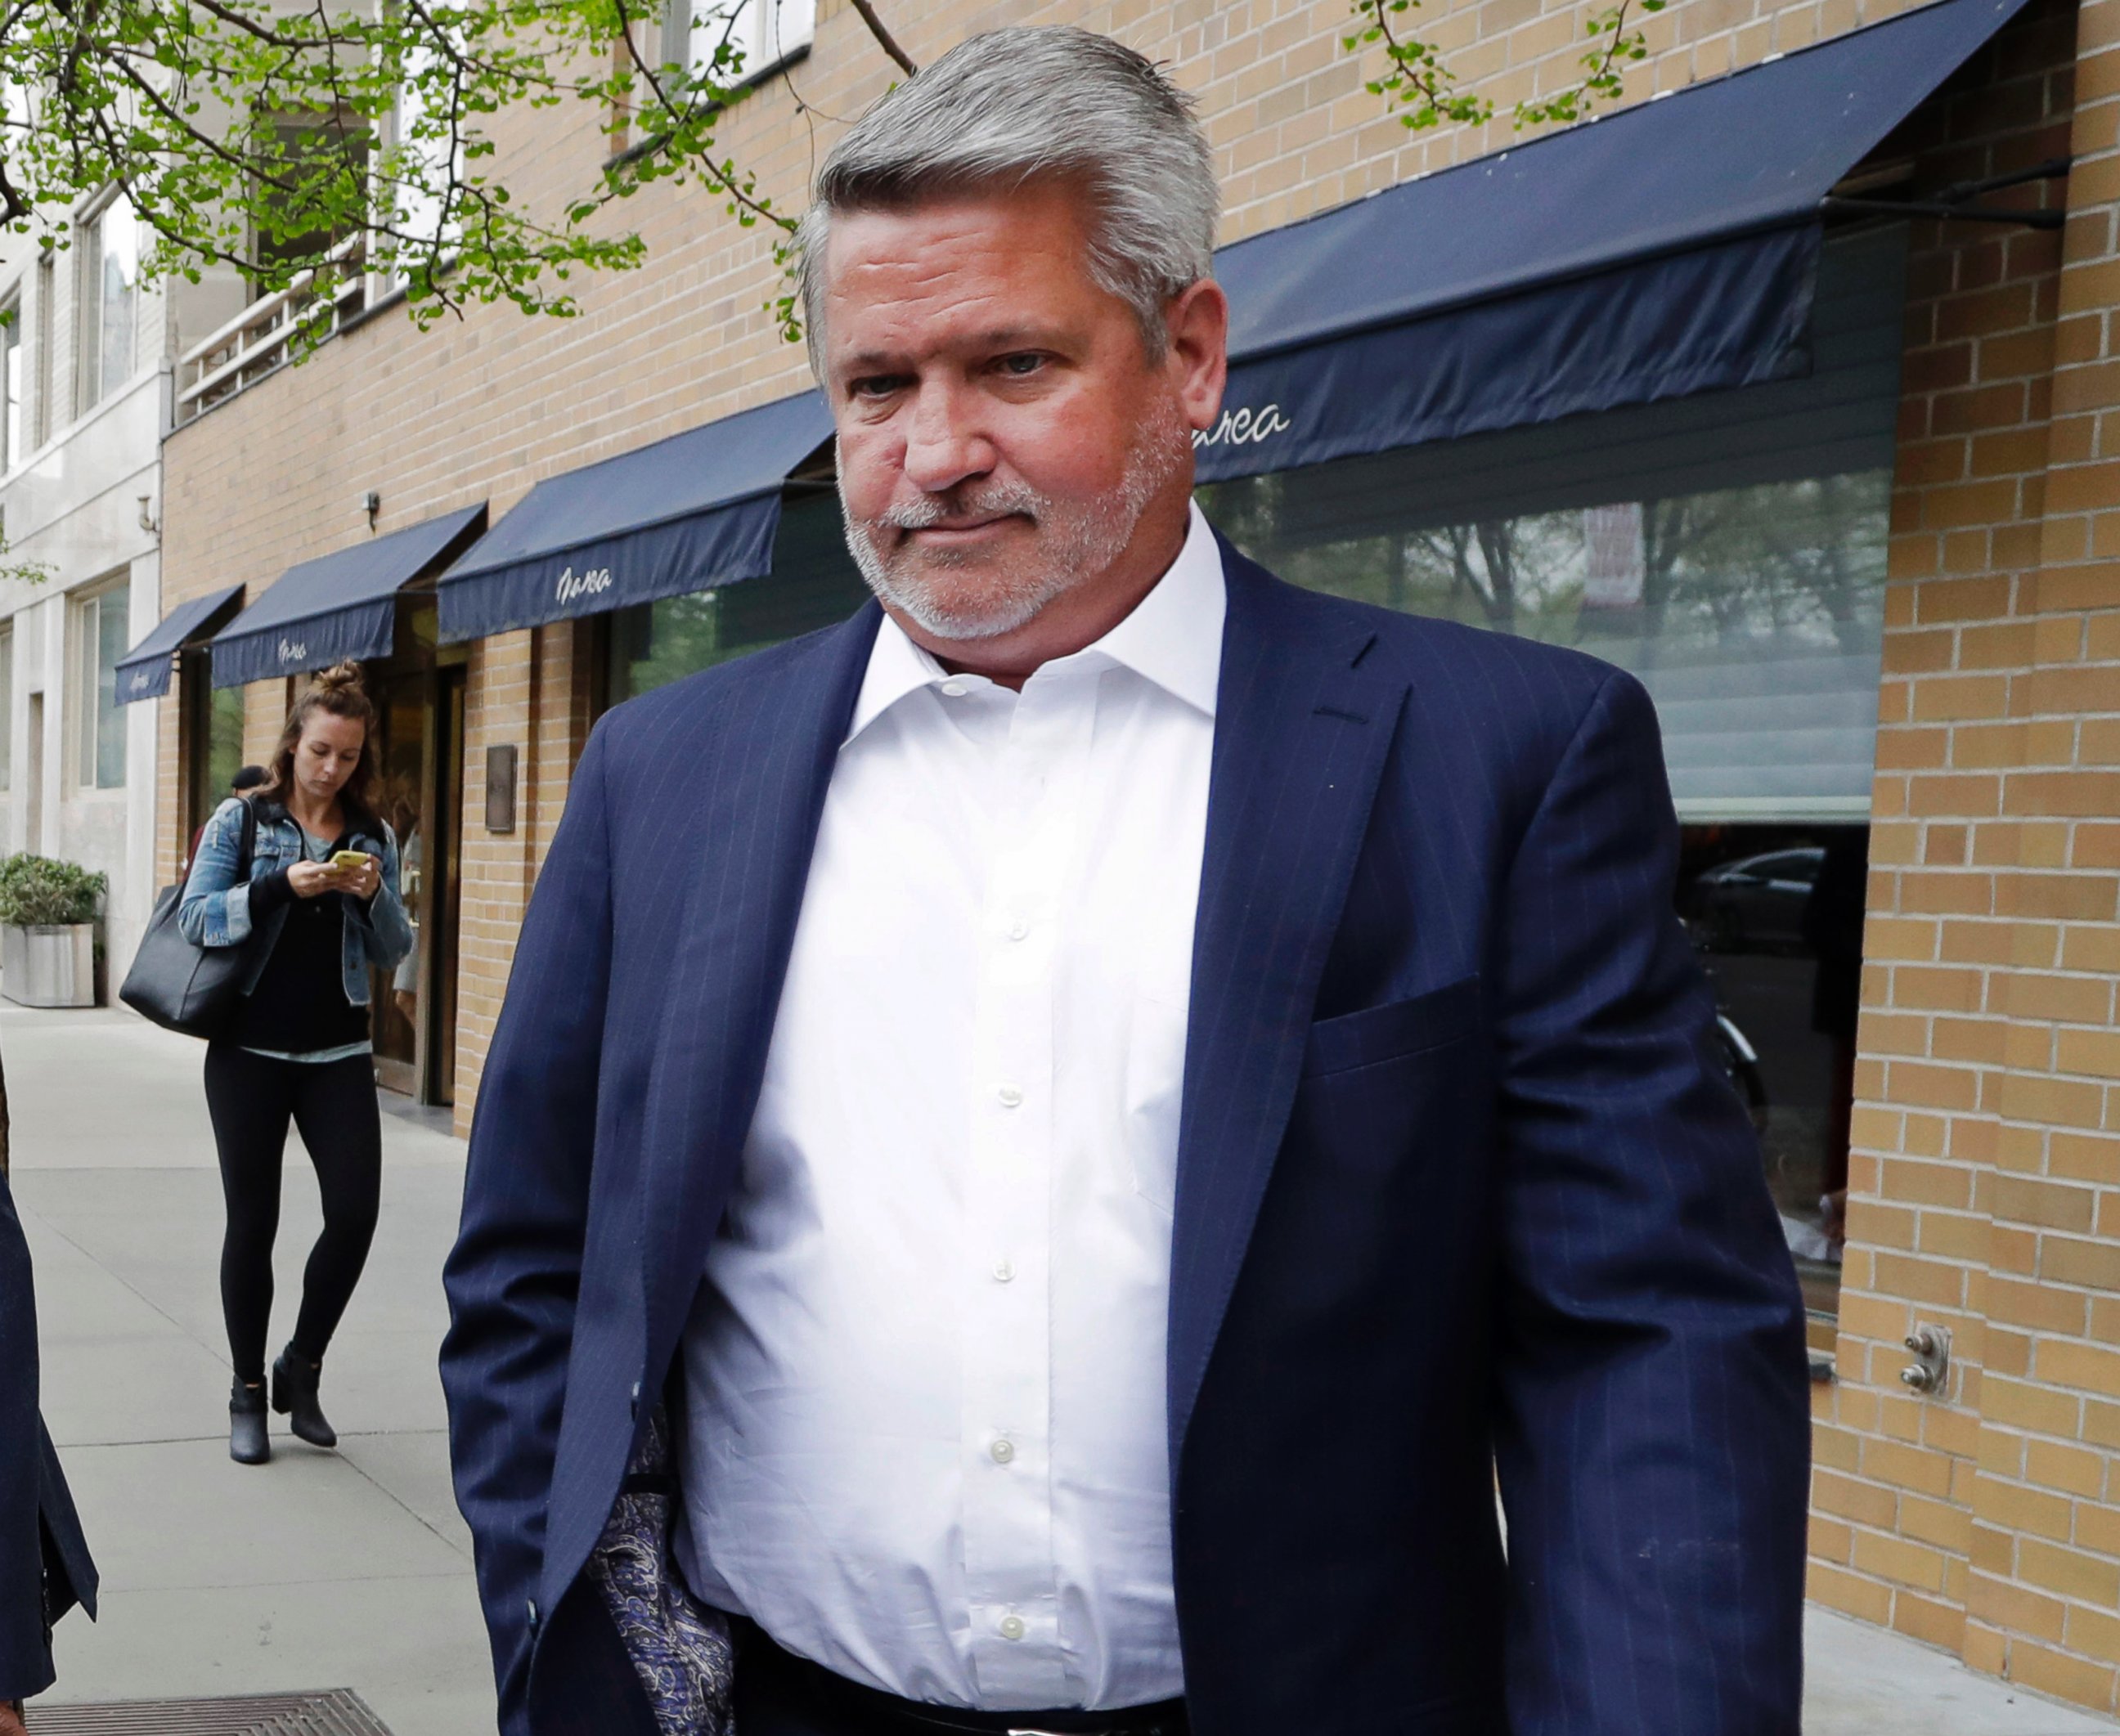 In this April 24, 2017, file photo, then-Fox News co-president Bill Shine, right, leaves a New York restaurant. President Donald Trump is expected to name Shine as director of White House press and communications.